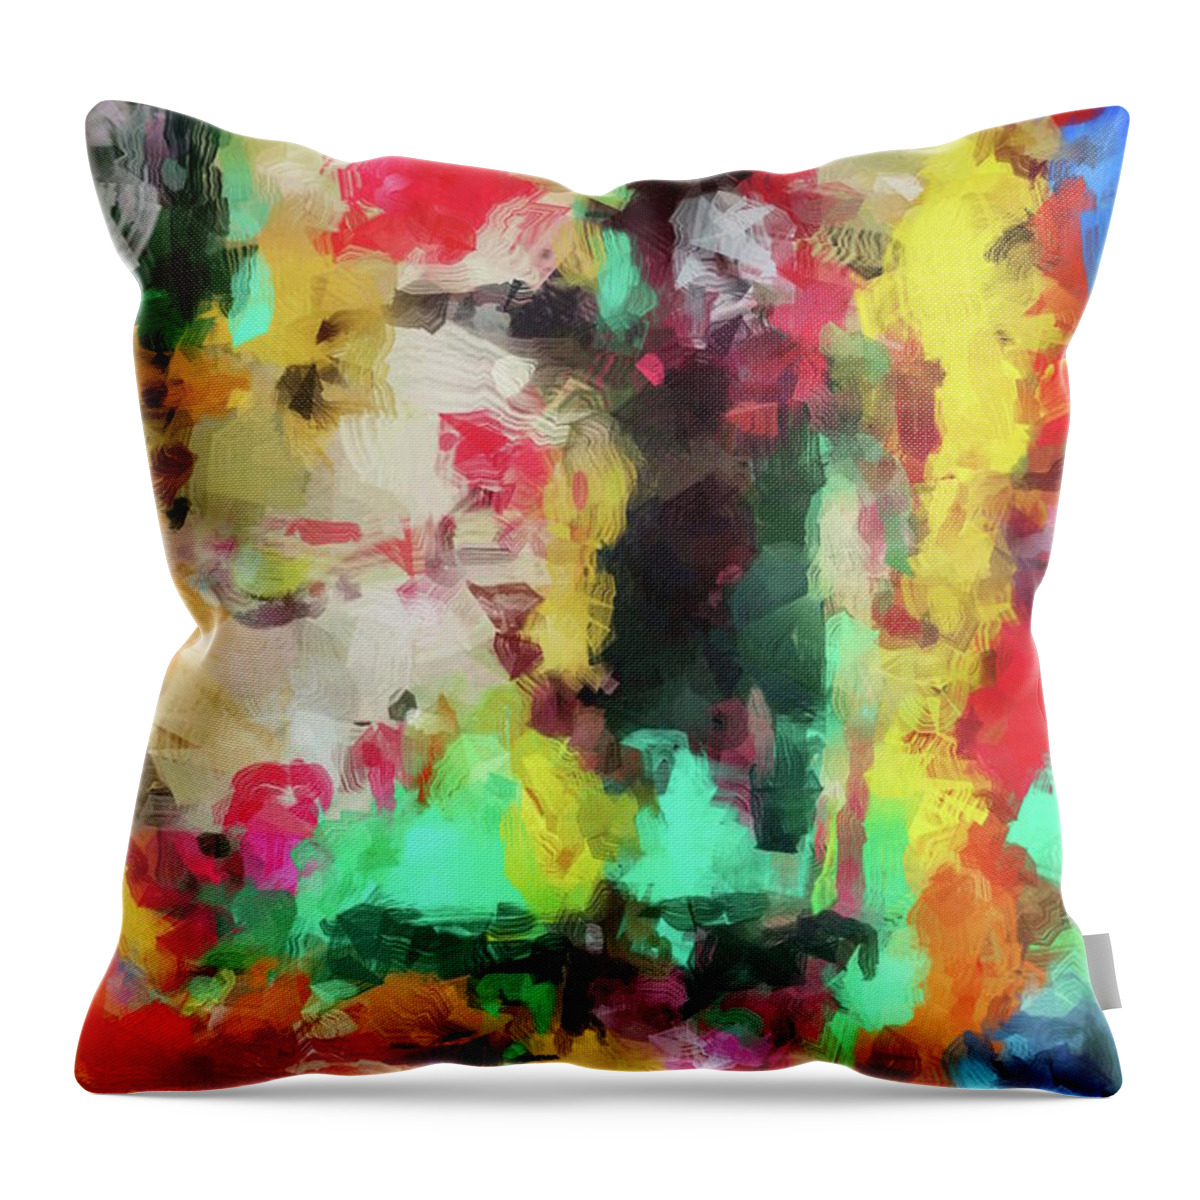  Throw Pillow featuring the photograph Tag Abstract by Al Harden